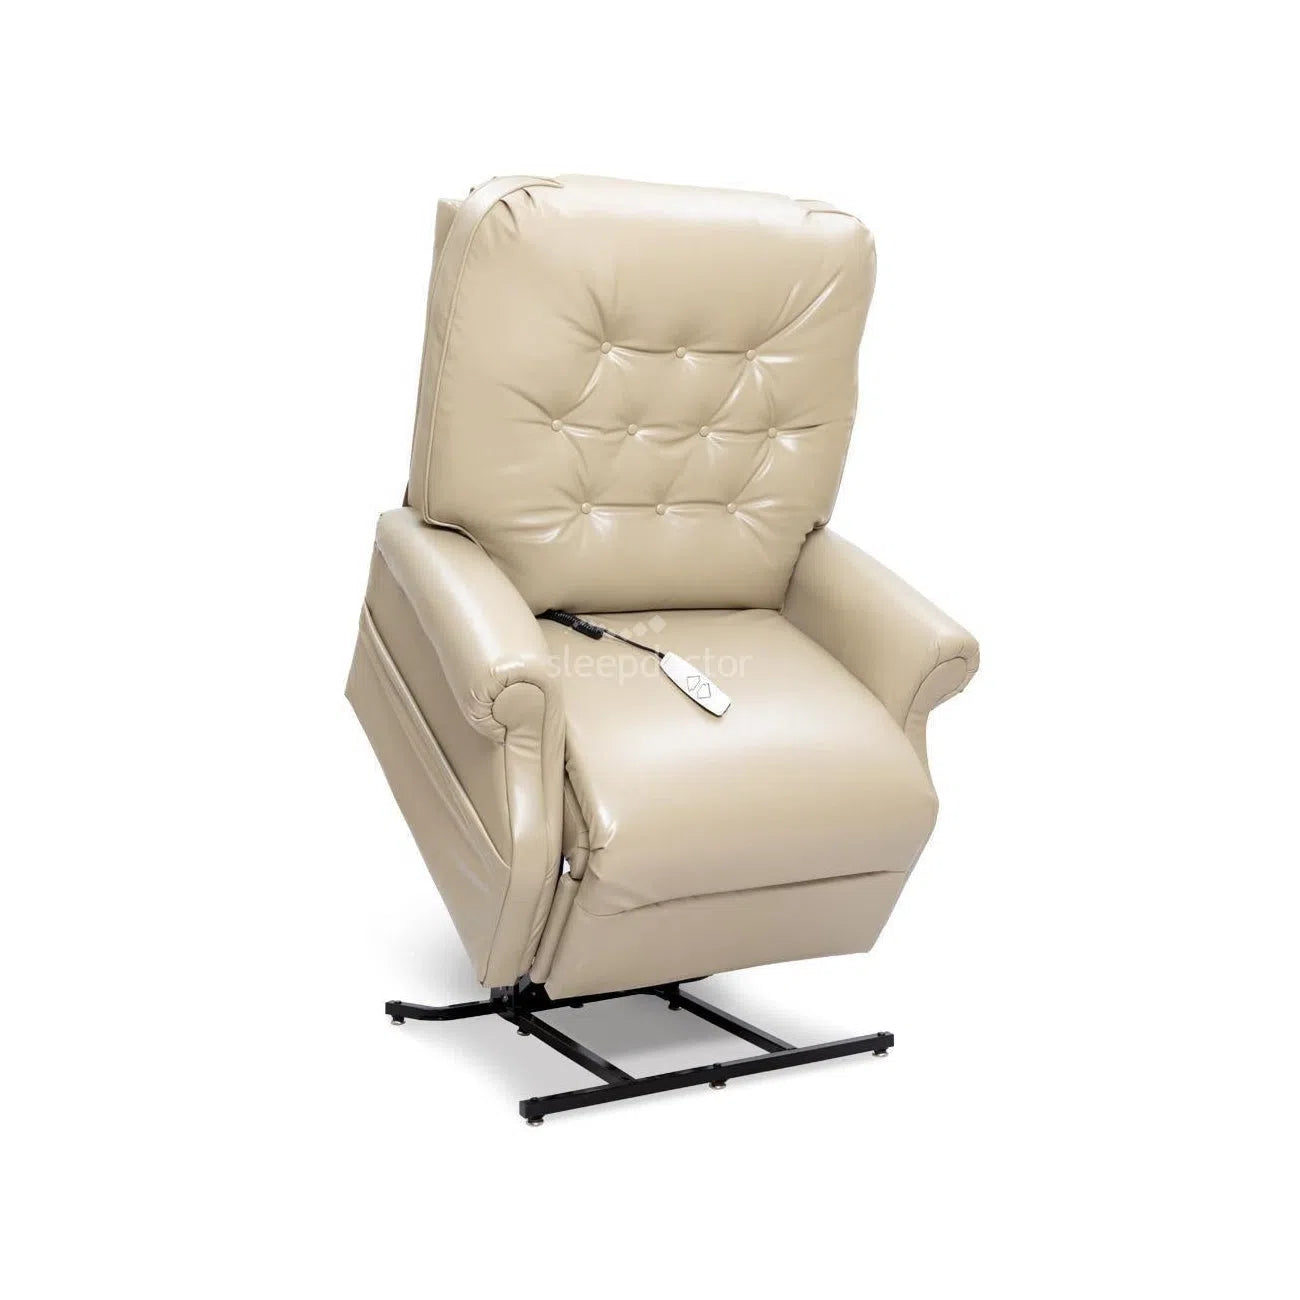 LC-358 XL Lift Chair In Latte up to 250kg with Battery Backup by Pride Mobility-Sleep Doctor